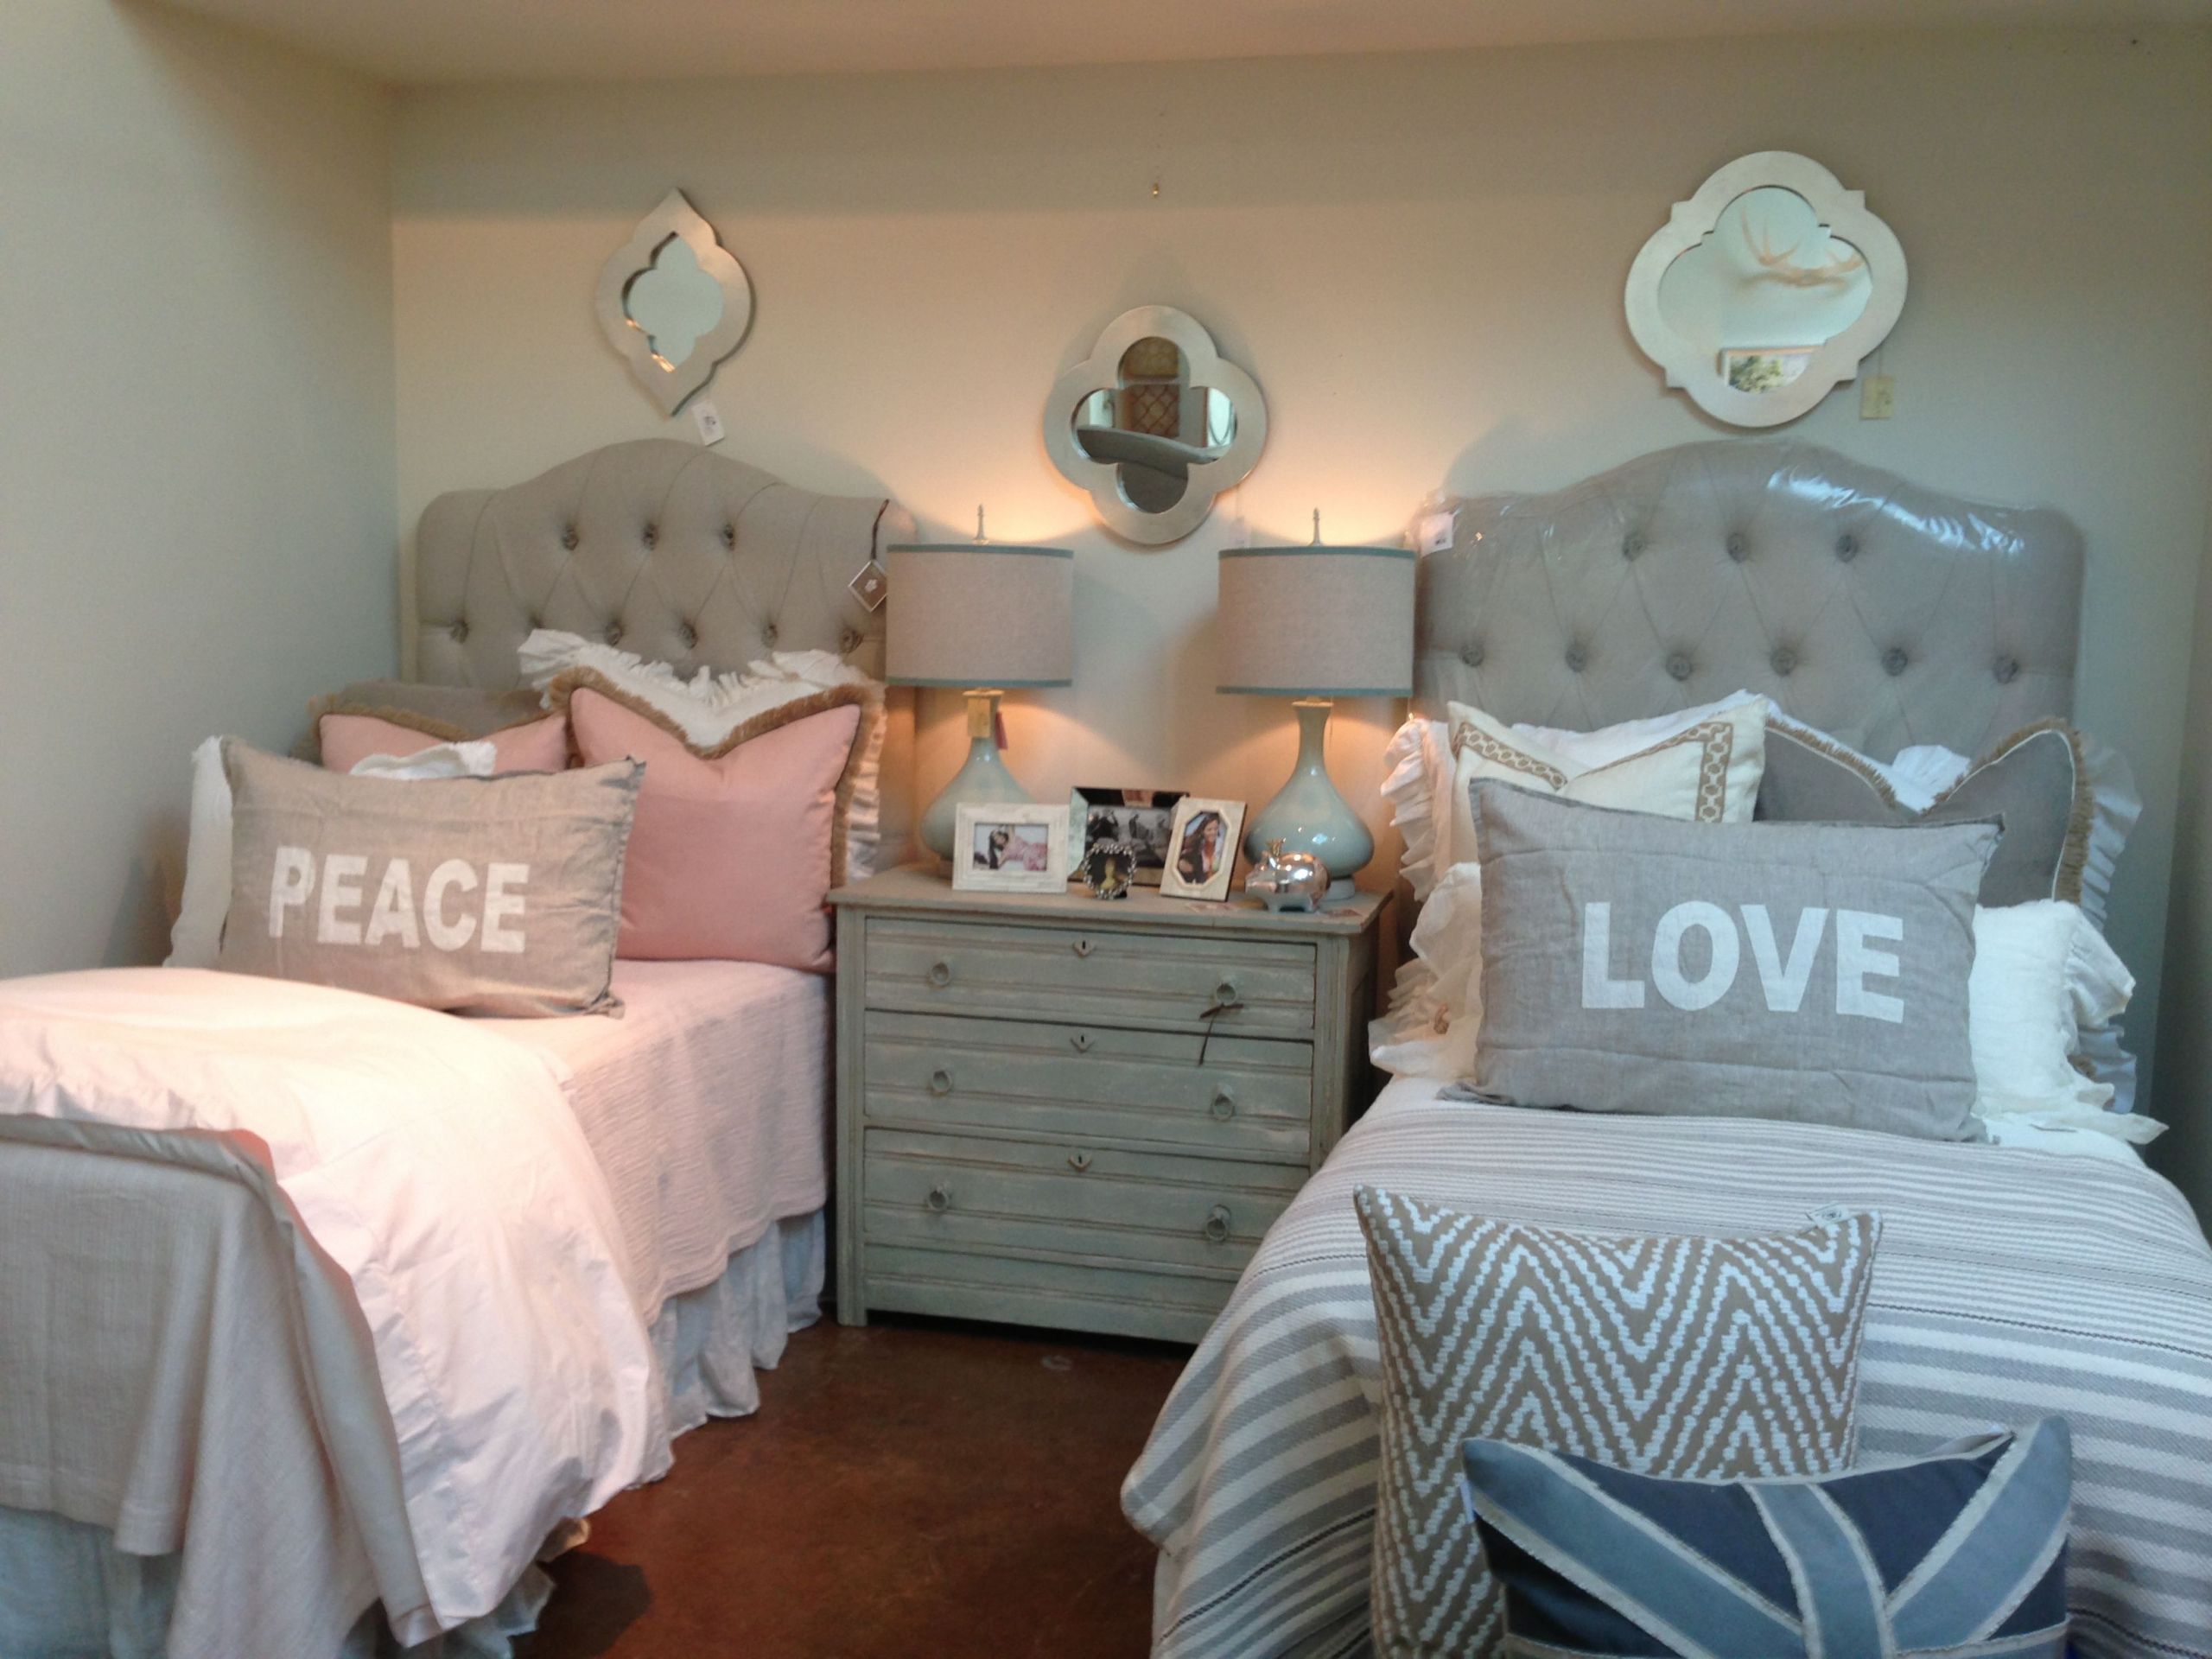 Boy And Girls Bedroom Ideas
 Girls & Boys twin beds too cute in 2019